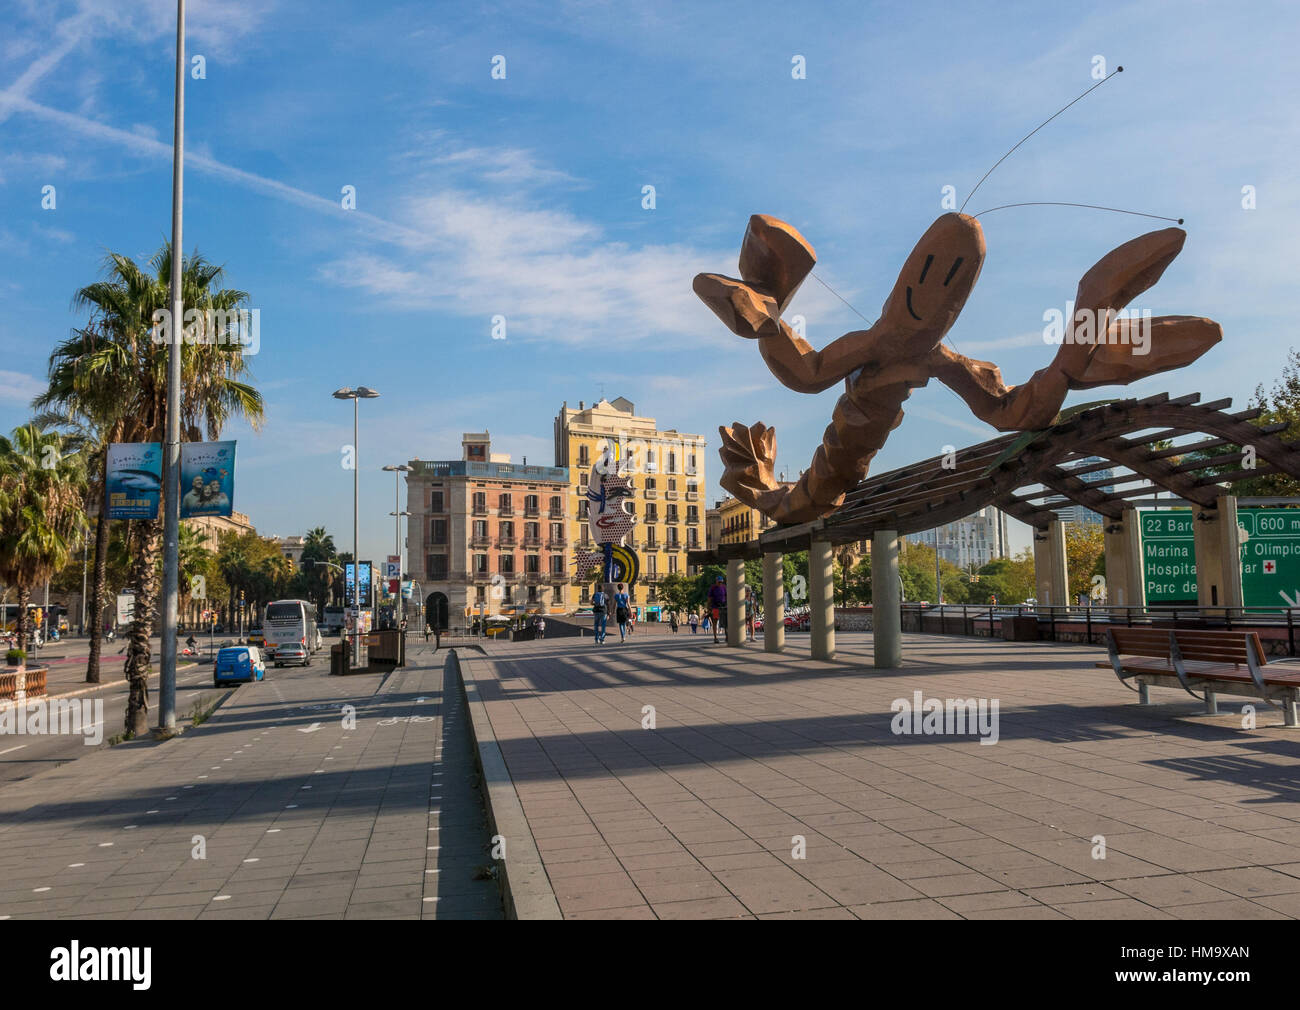 BARCELONA, SPAIN - OCT 5: passersby on a sunny day on October 5, 2016, on the Walk 'Moll de la Fusta', on the coast of the city of Barcelona. In the b Stock Photo